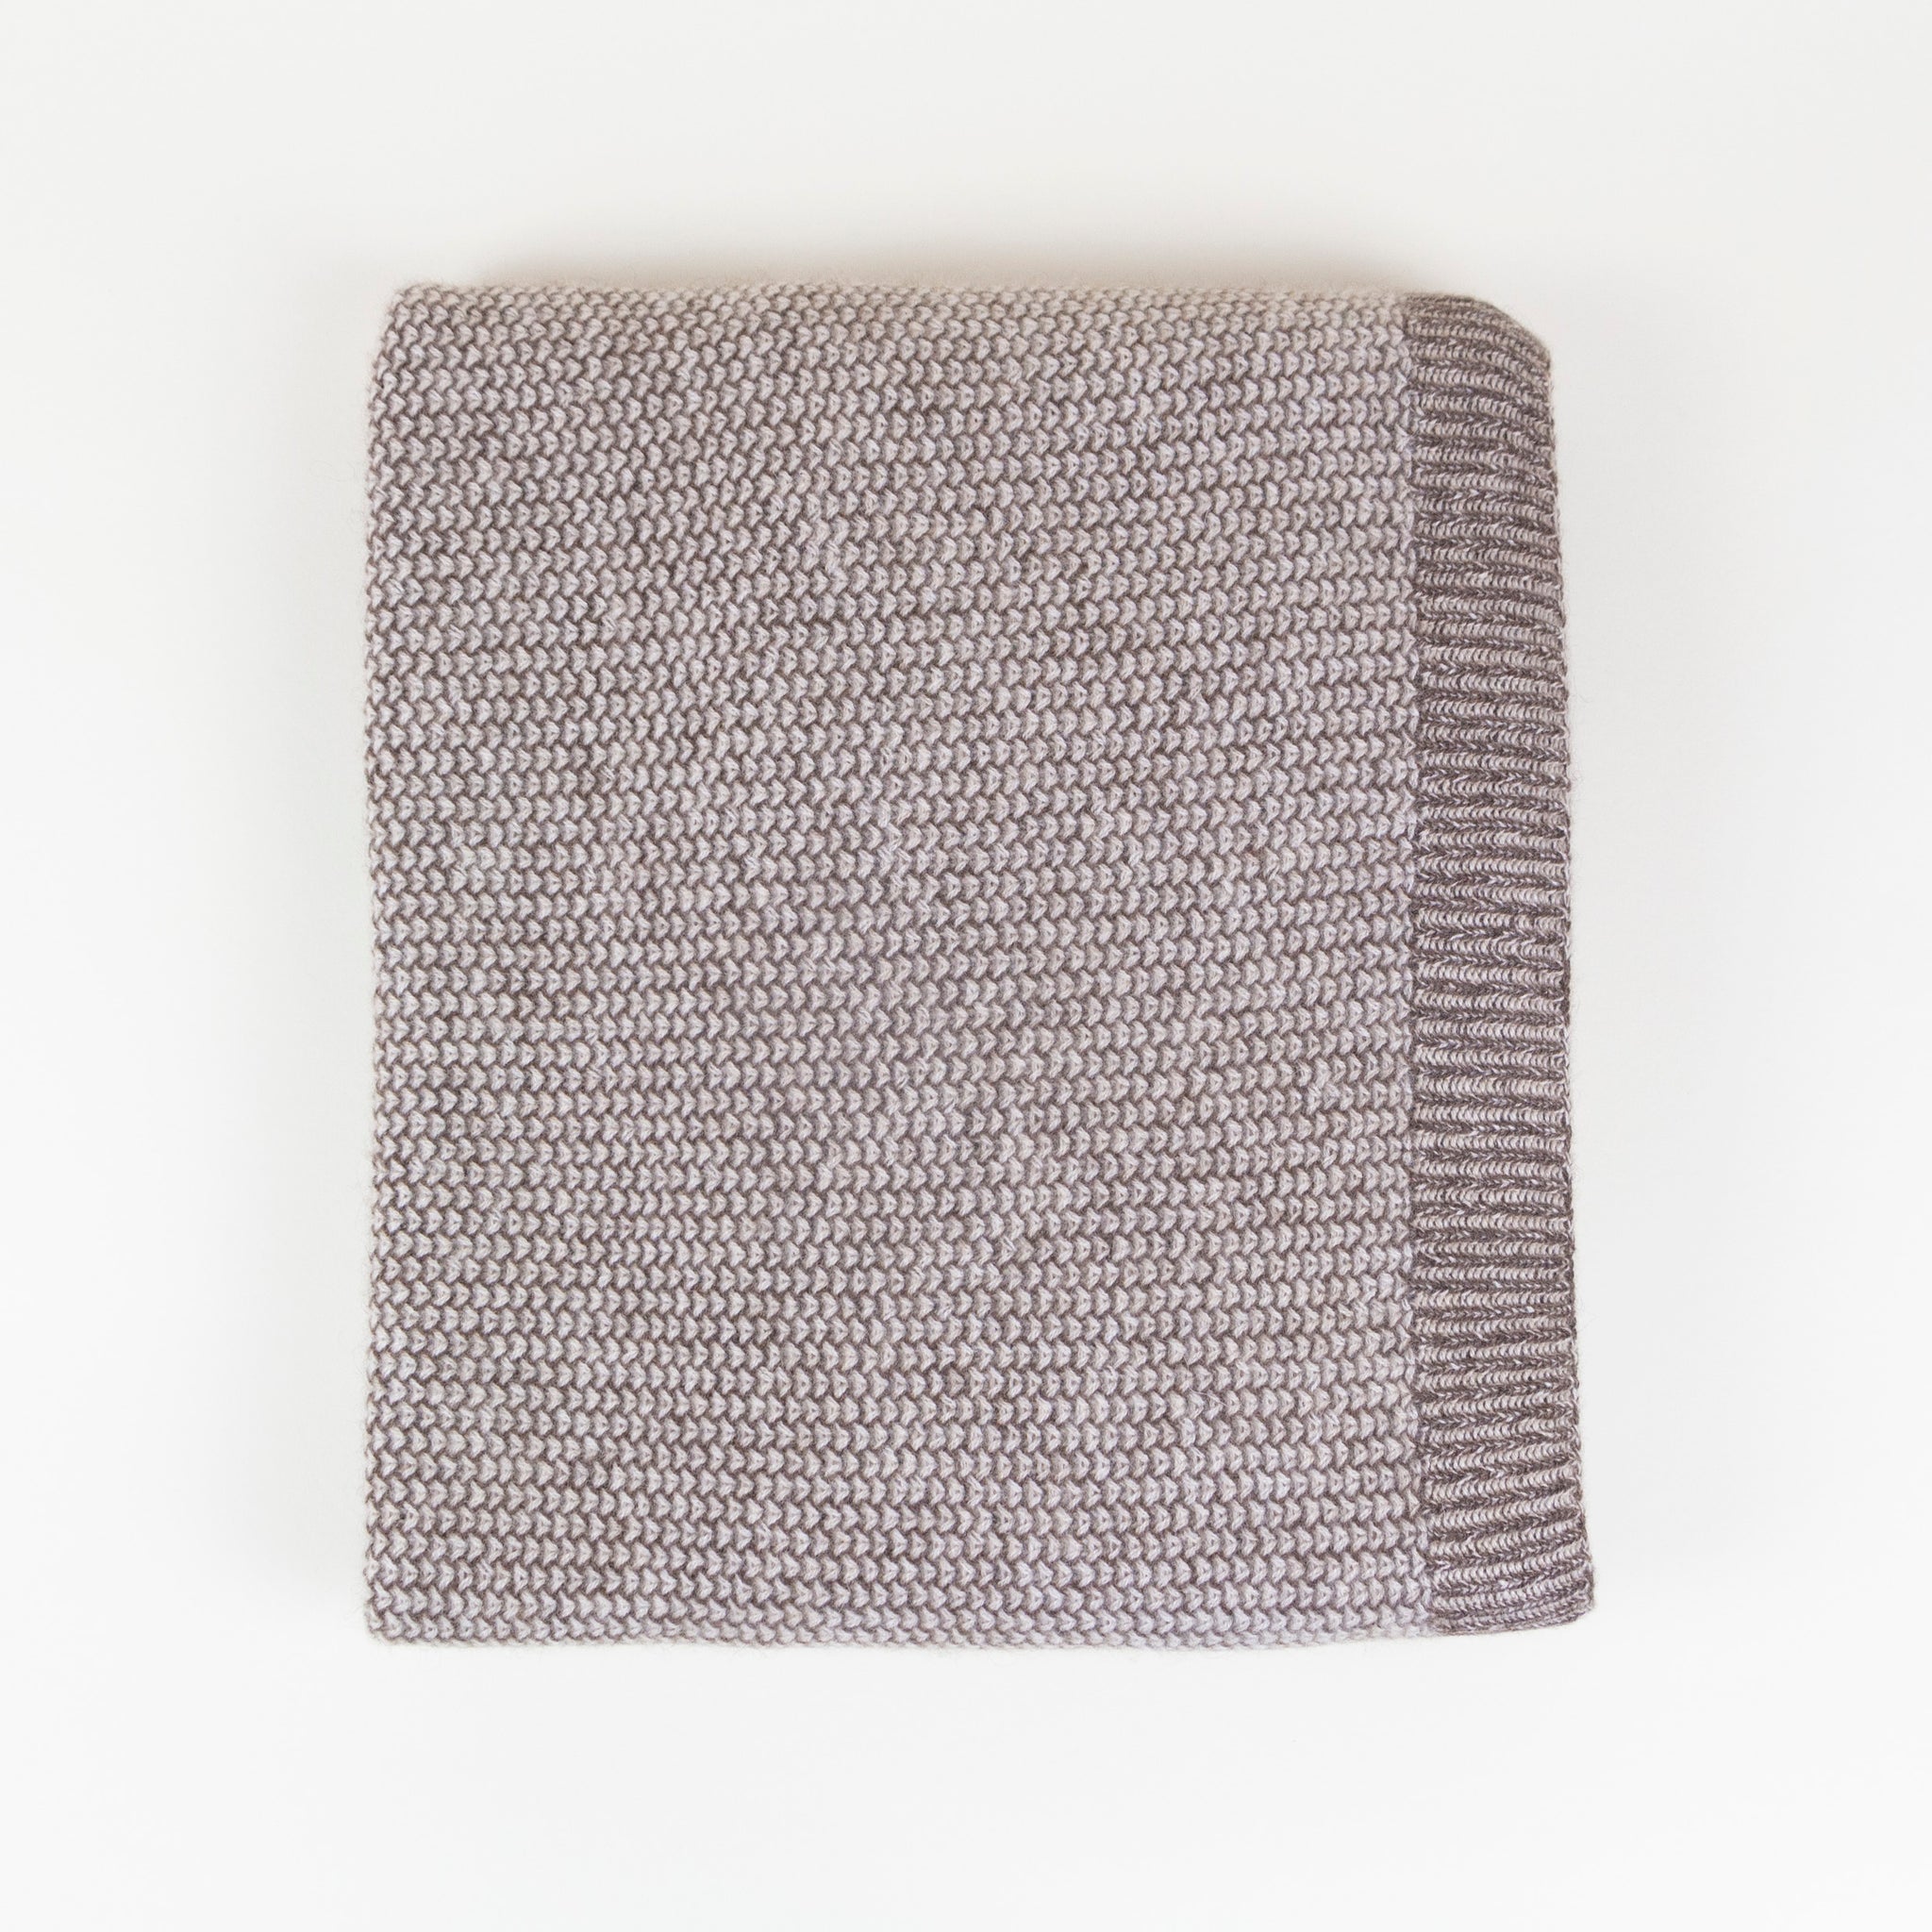 Cappuccino + Beige Beehive Knit Throw | HMT